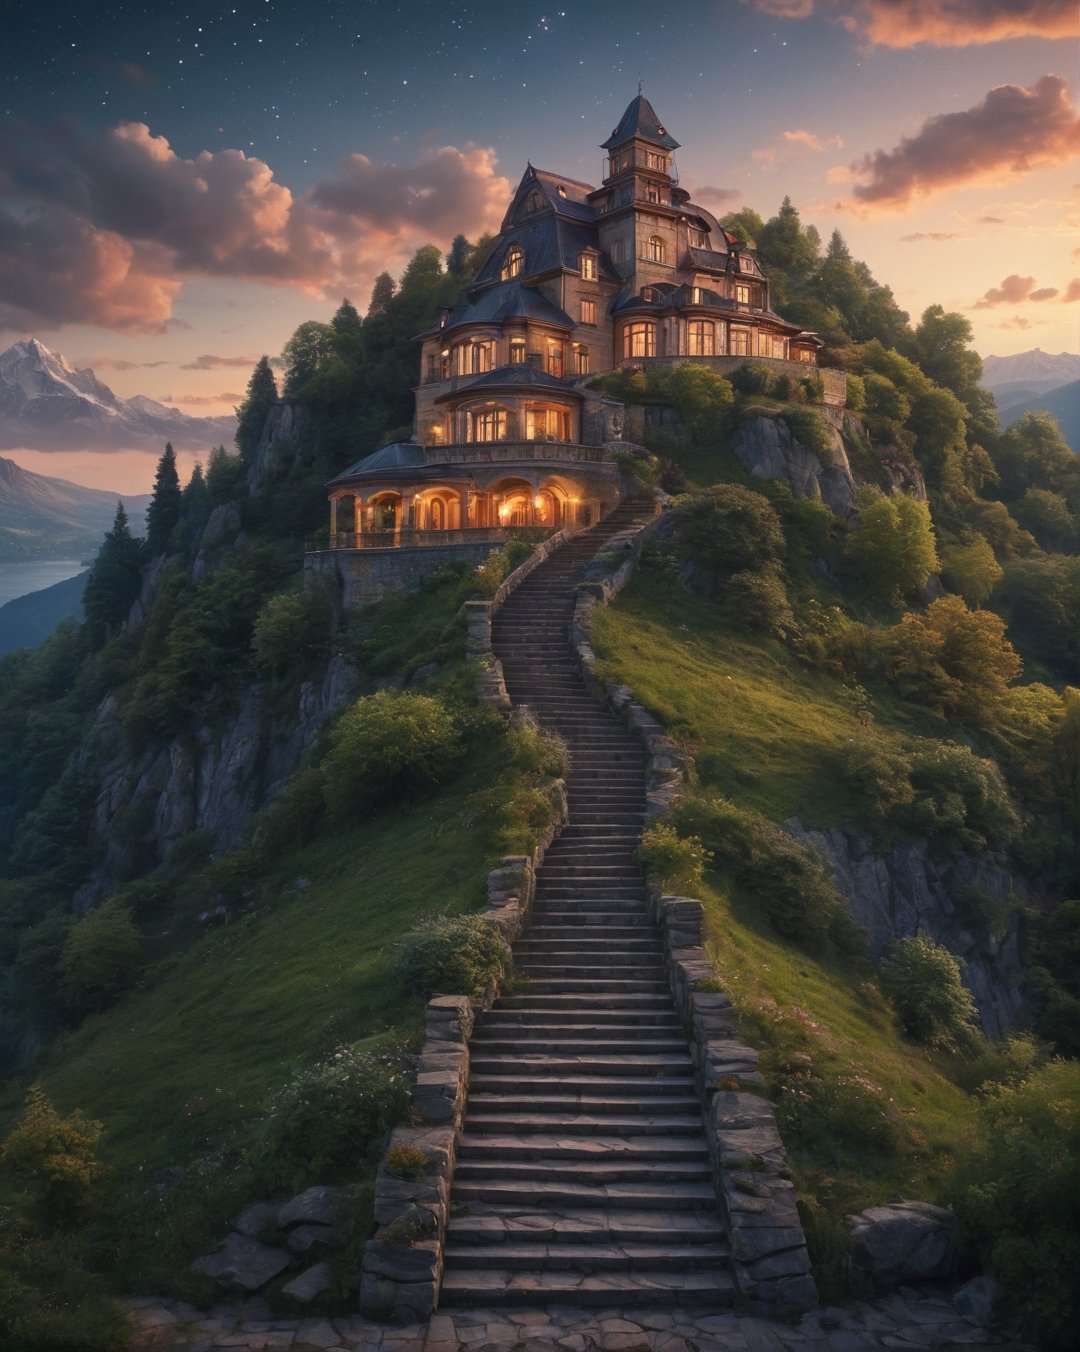 a house on a hill with stairs leading up to it, inspired by Evgeny Lushpin, infinite celestial library, luxury brand, with the sky full of stars, photorealistic. realistic, ticket, mountains and lakes, on artstastion, hotel, beautifully soft lit, lumigrainy cinematic, godlyphoto r3al, detailmaster2, aesthetic portrait, cinematic colors, earthy, moody